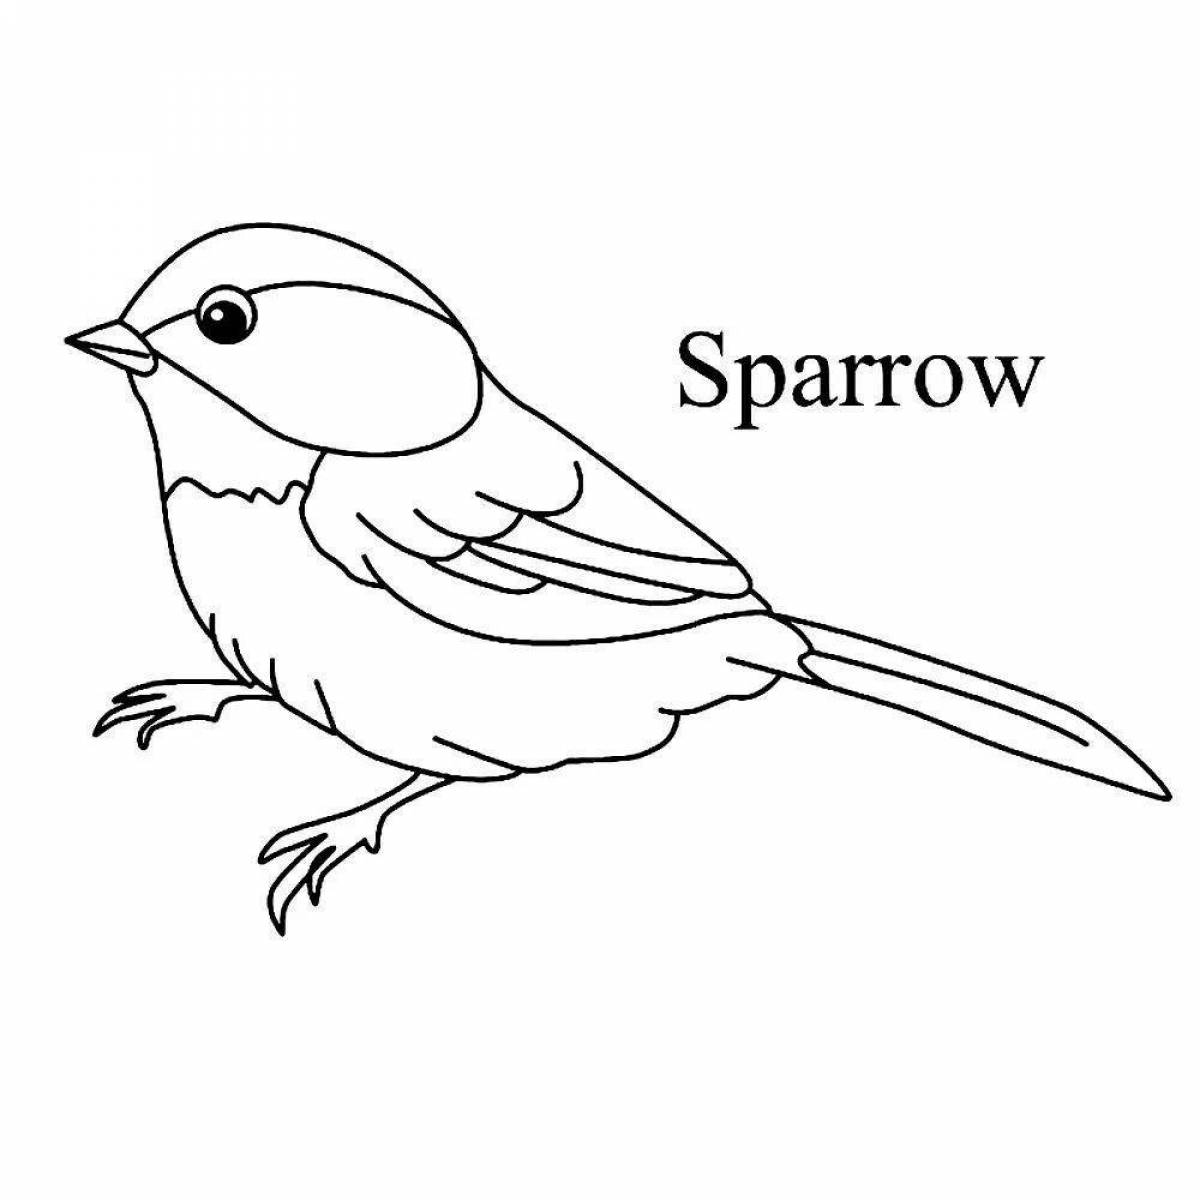 Sparrow for children 6 7 years old #1